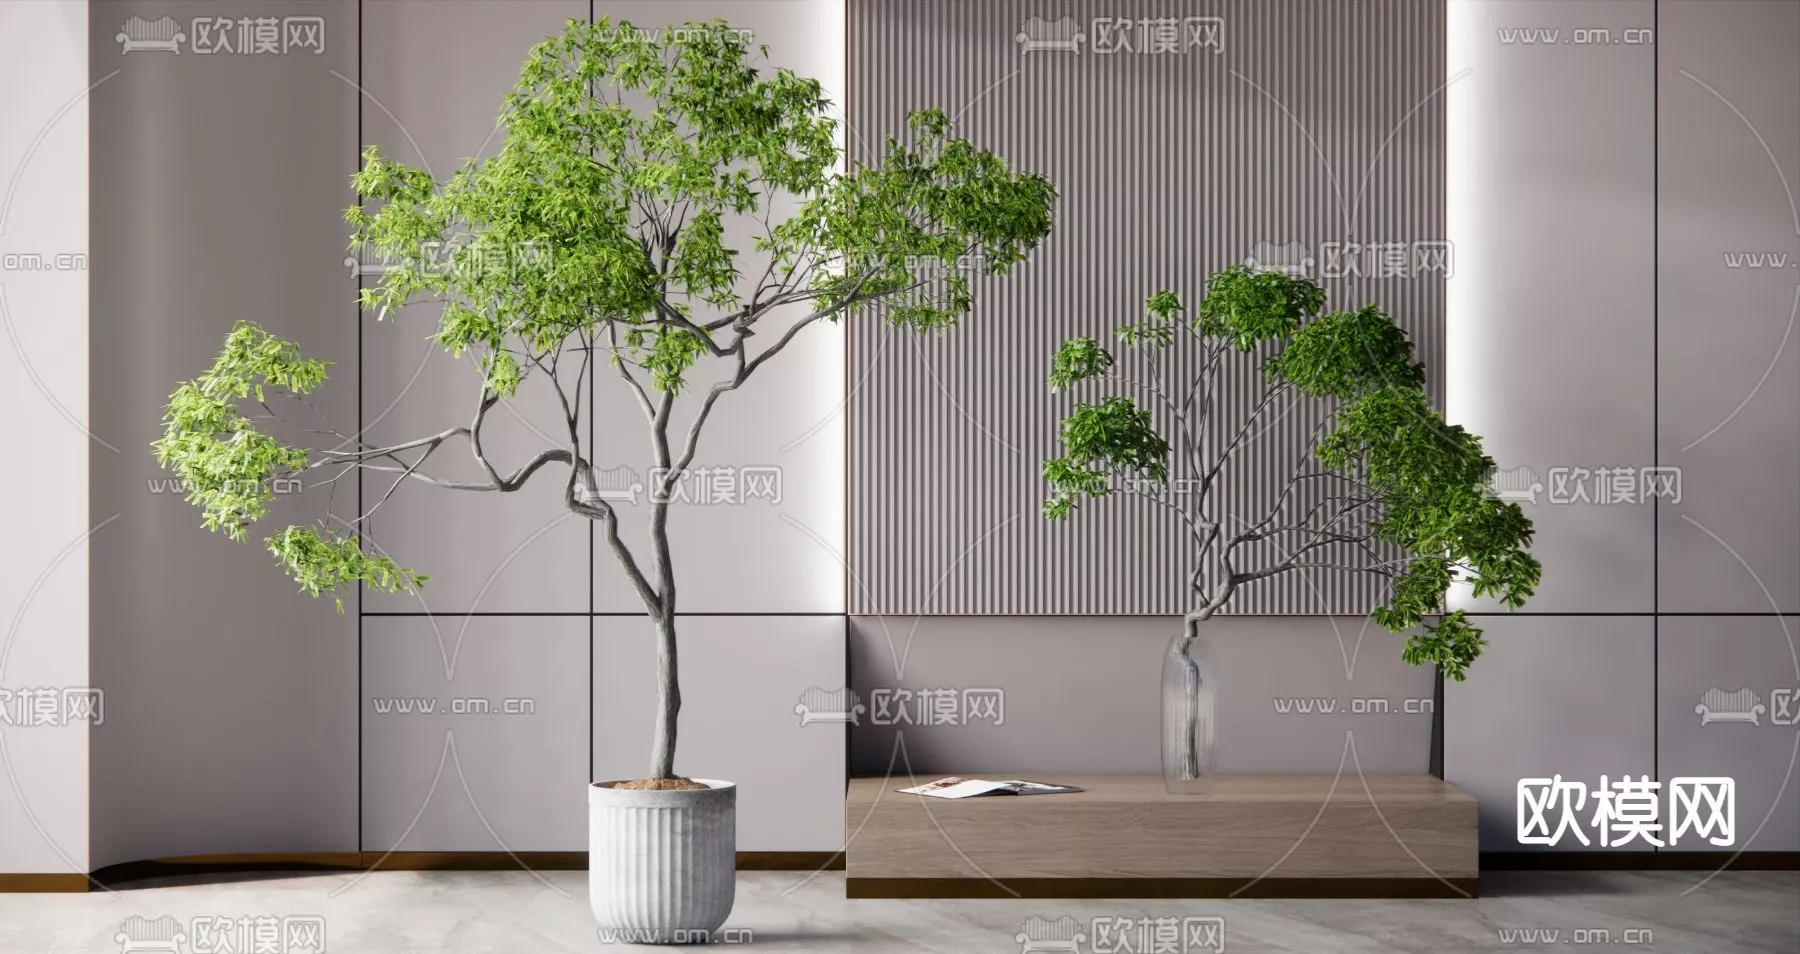 MODERN TREE - SKETCHUP 3D MODEL - VRAY OR ENSCAPE - ID15377